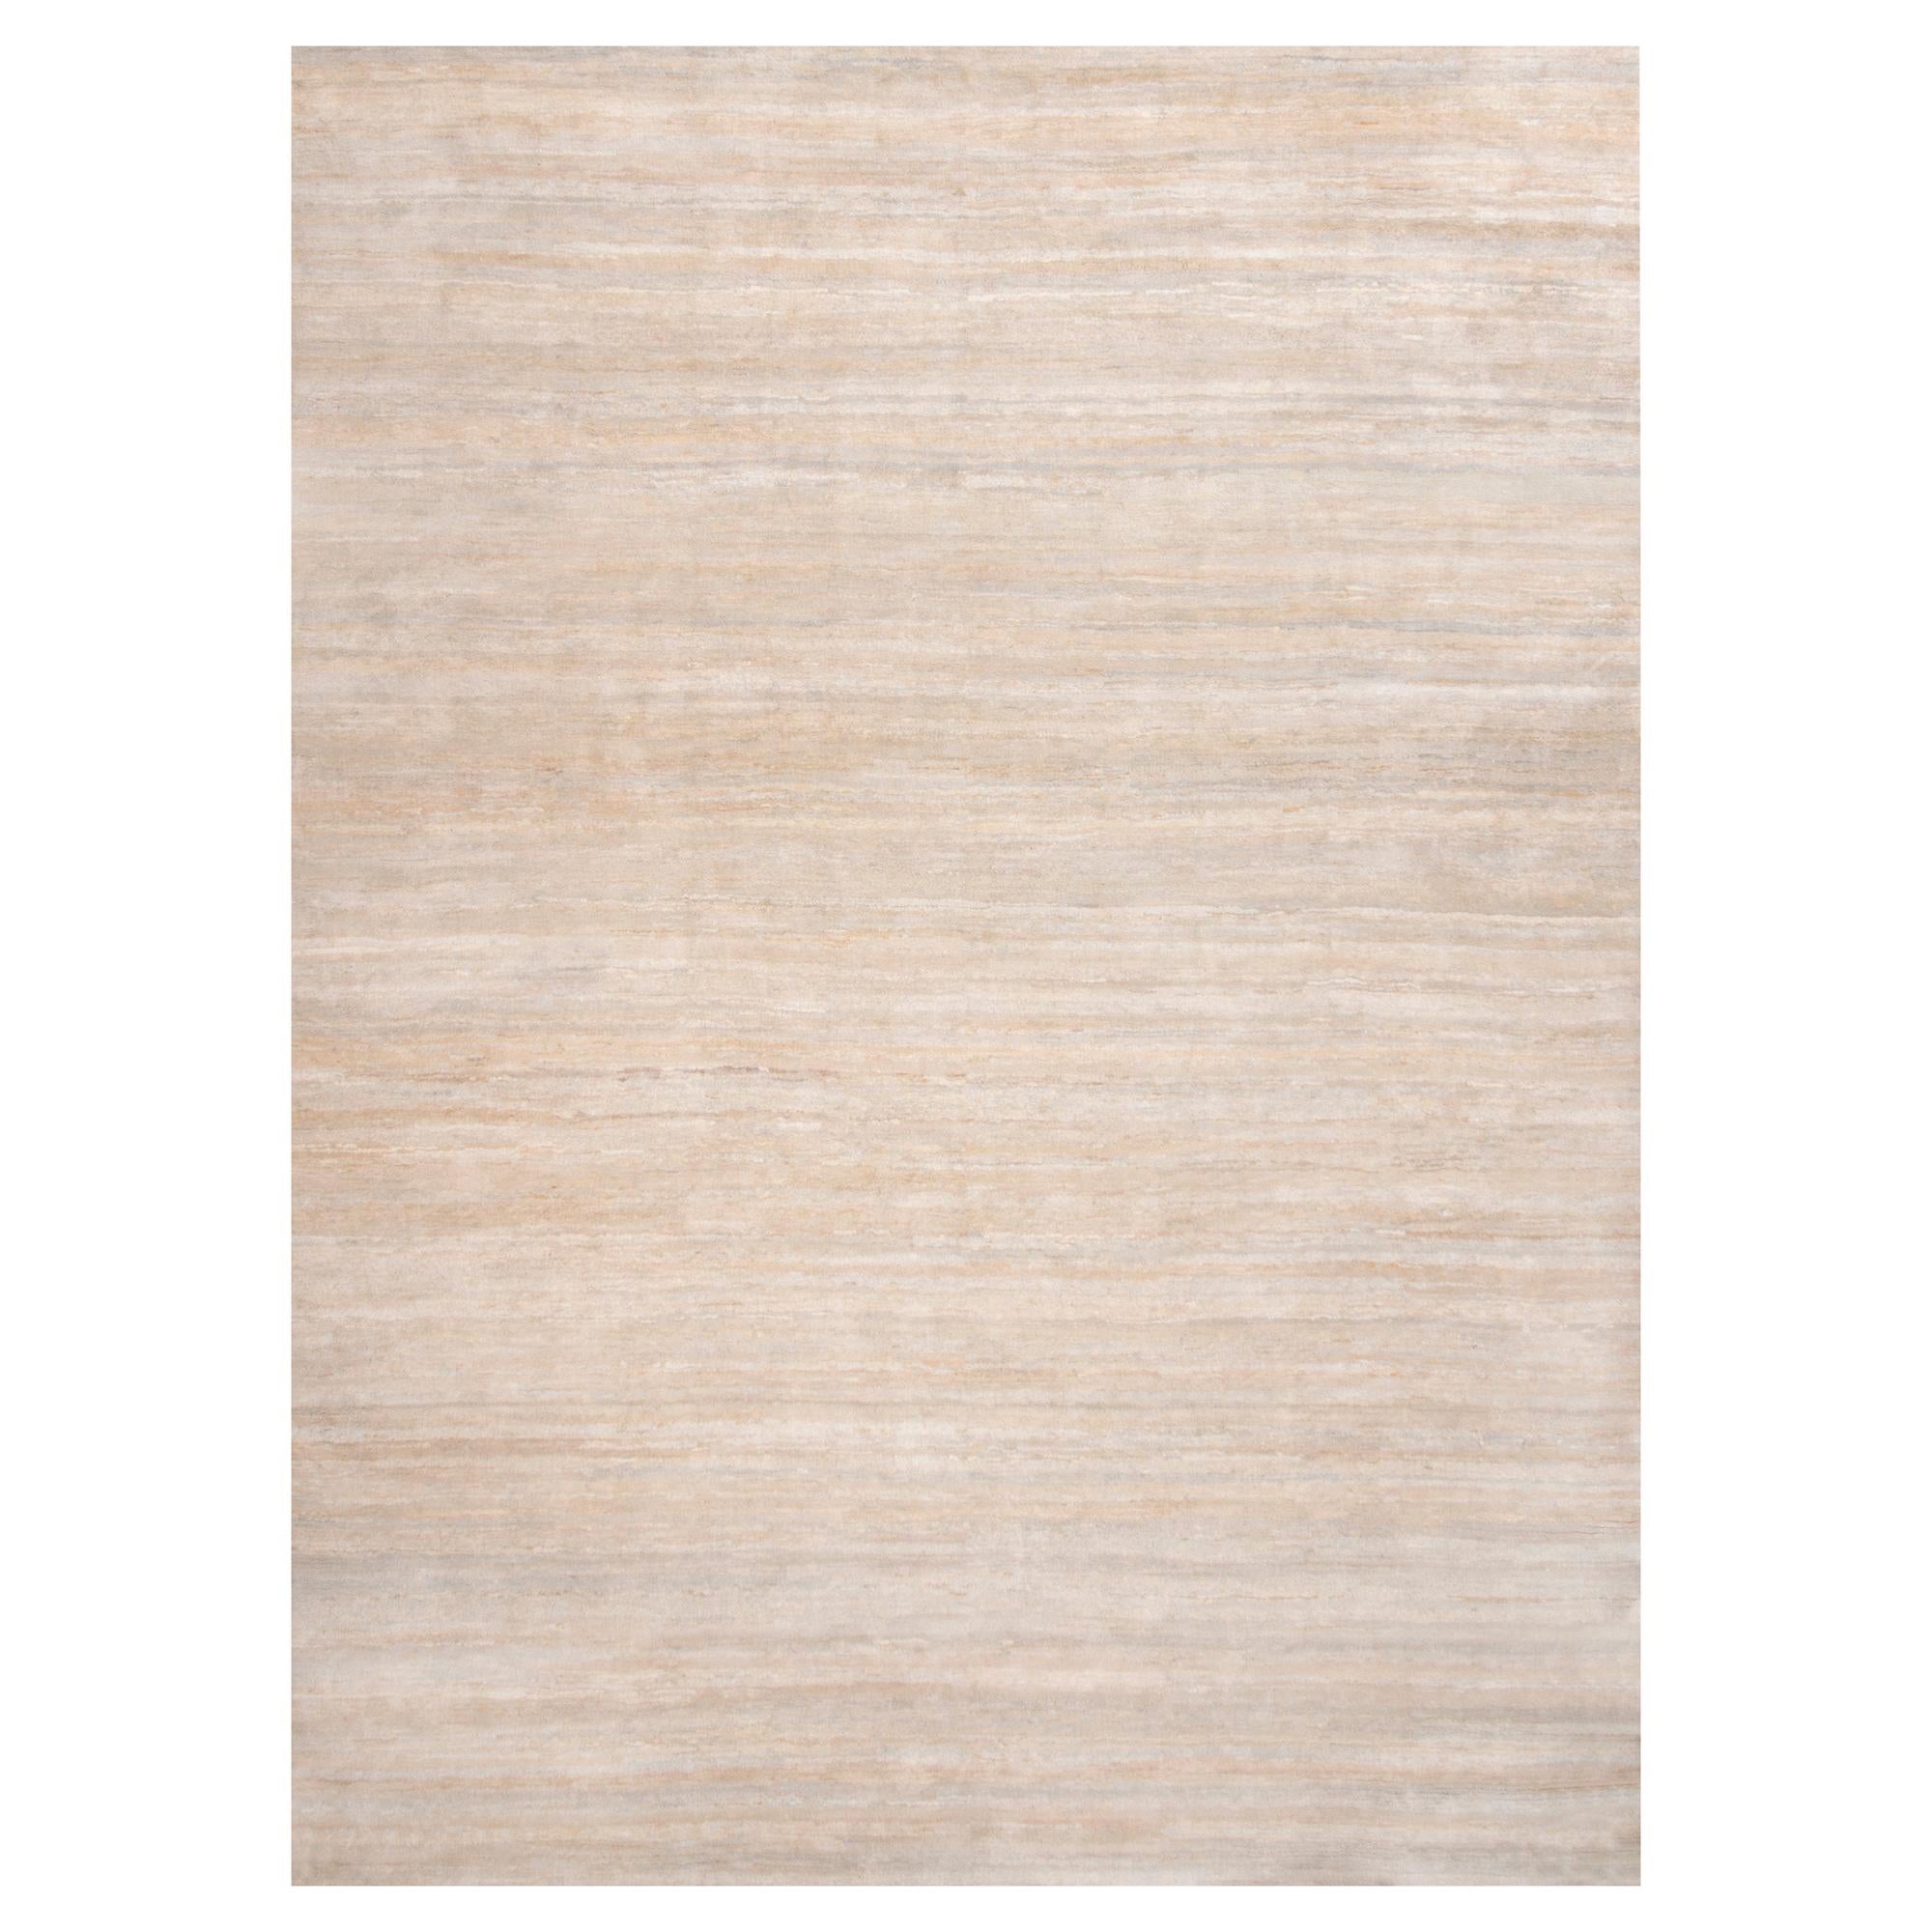 Rug & Kilim’s Textural Plain Modern Rug in Beige Two Tones For Sale